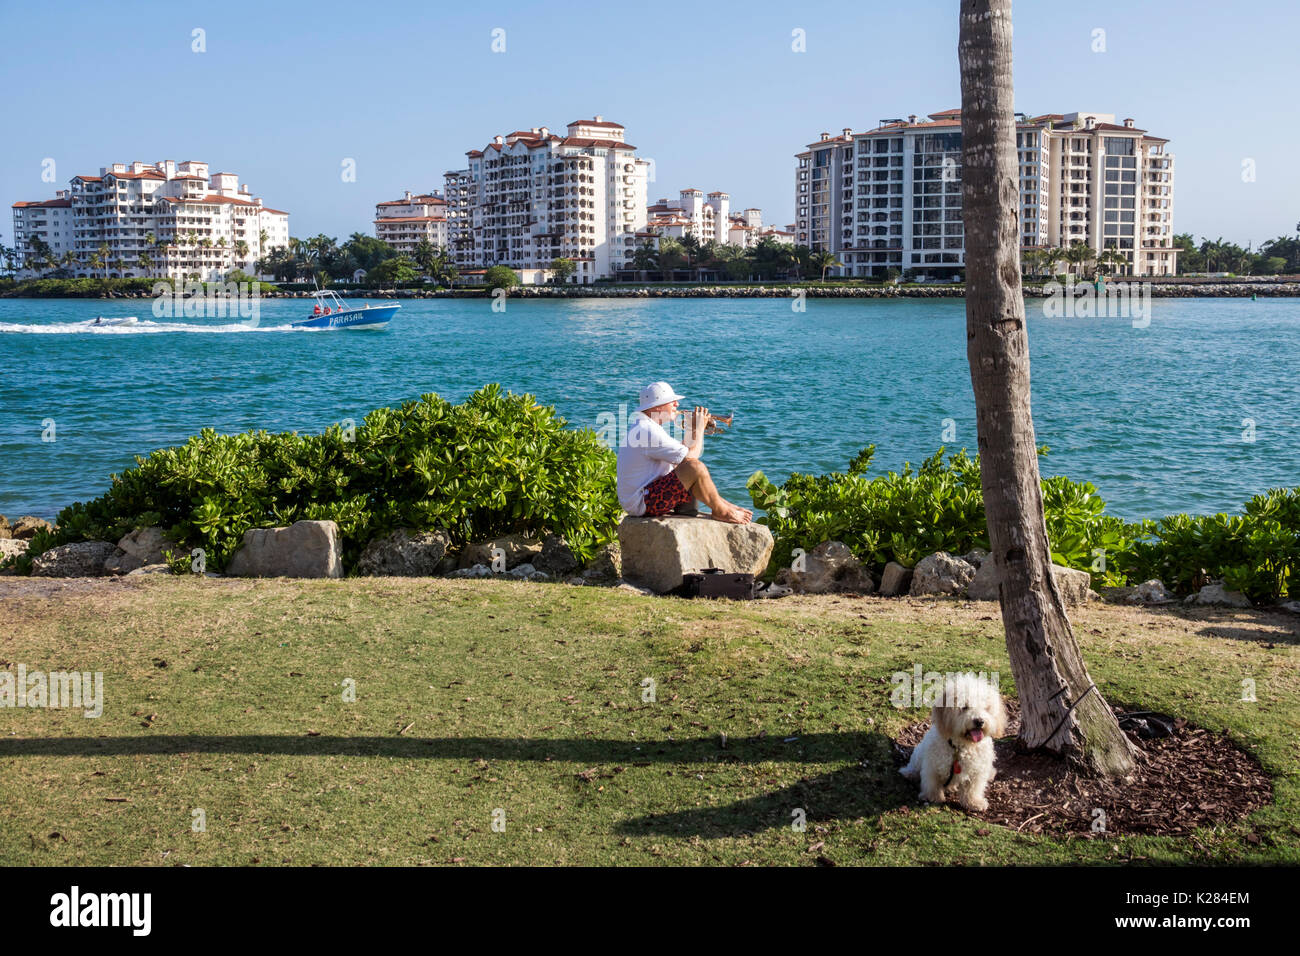 Miami Beach Florida,South Pointe Park,urban park,Government Cut,waterfront,Fisher Island,man men male,dog,playing trumpet horn,FL170430241 Stock Photo